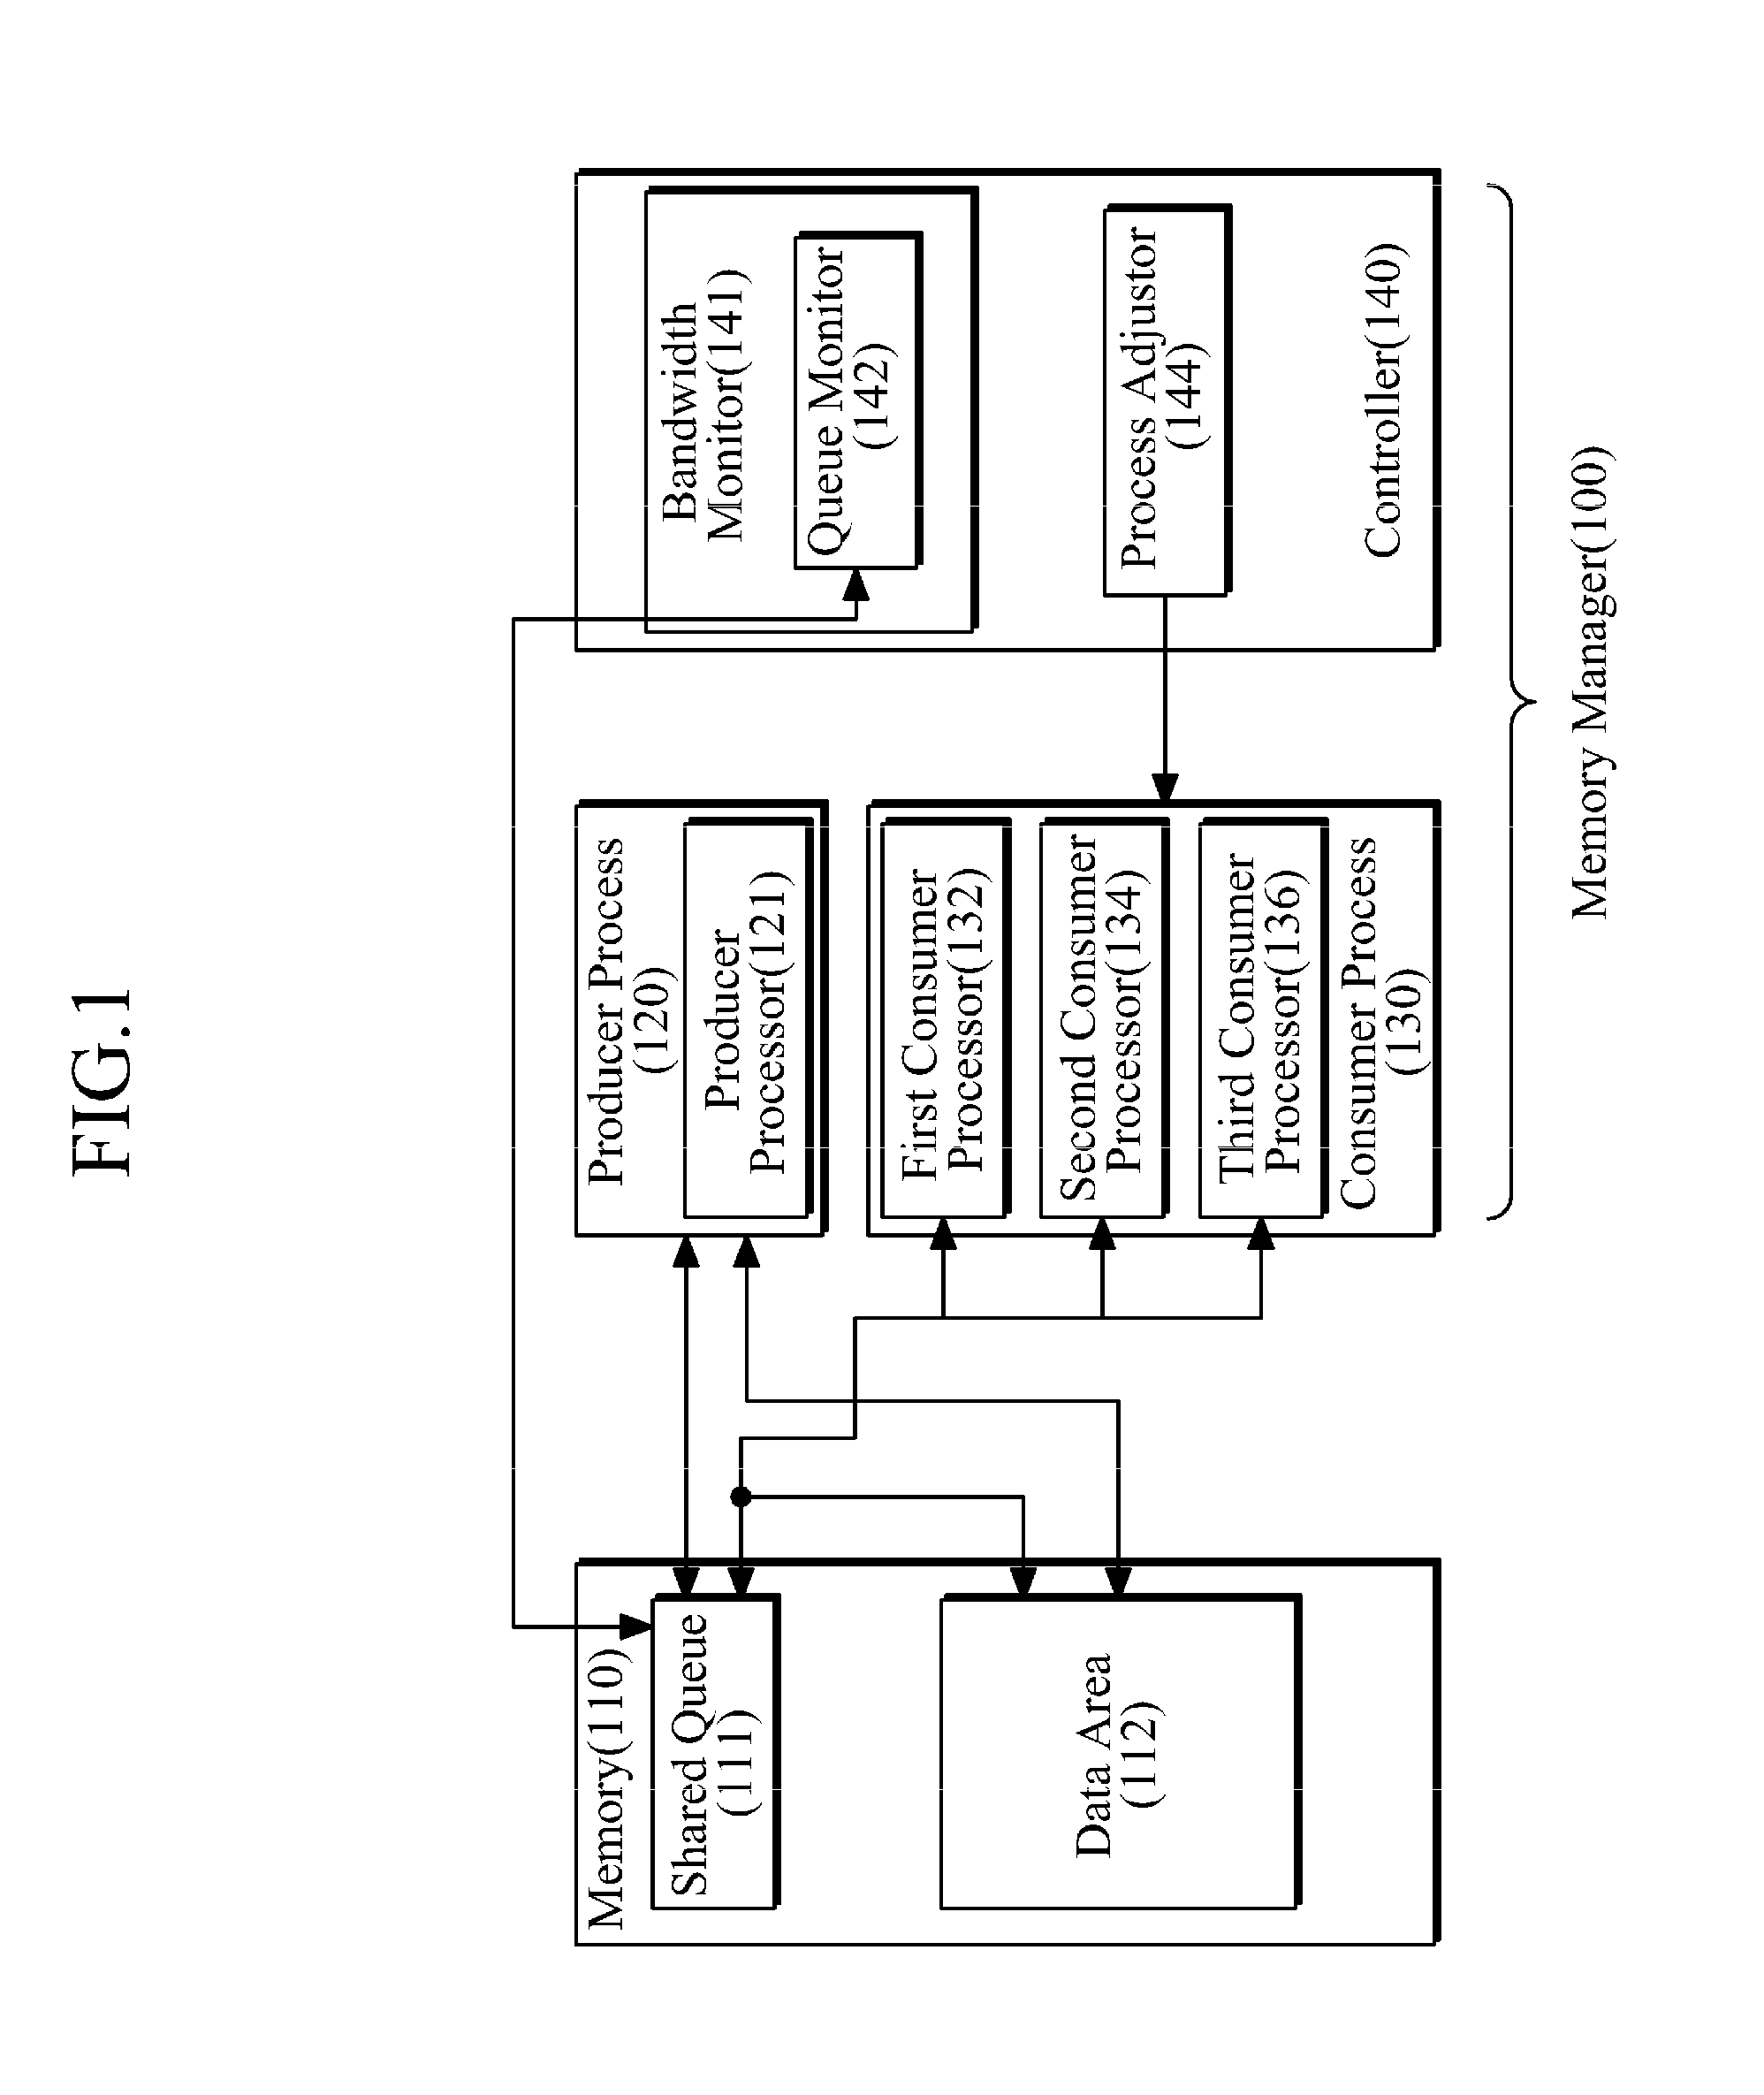 Method and memory manager for managing memory